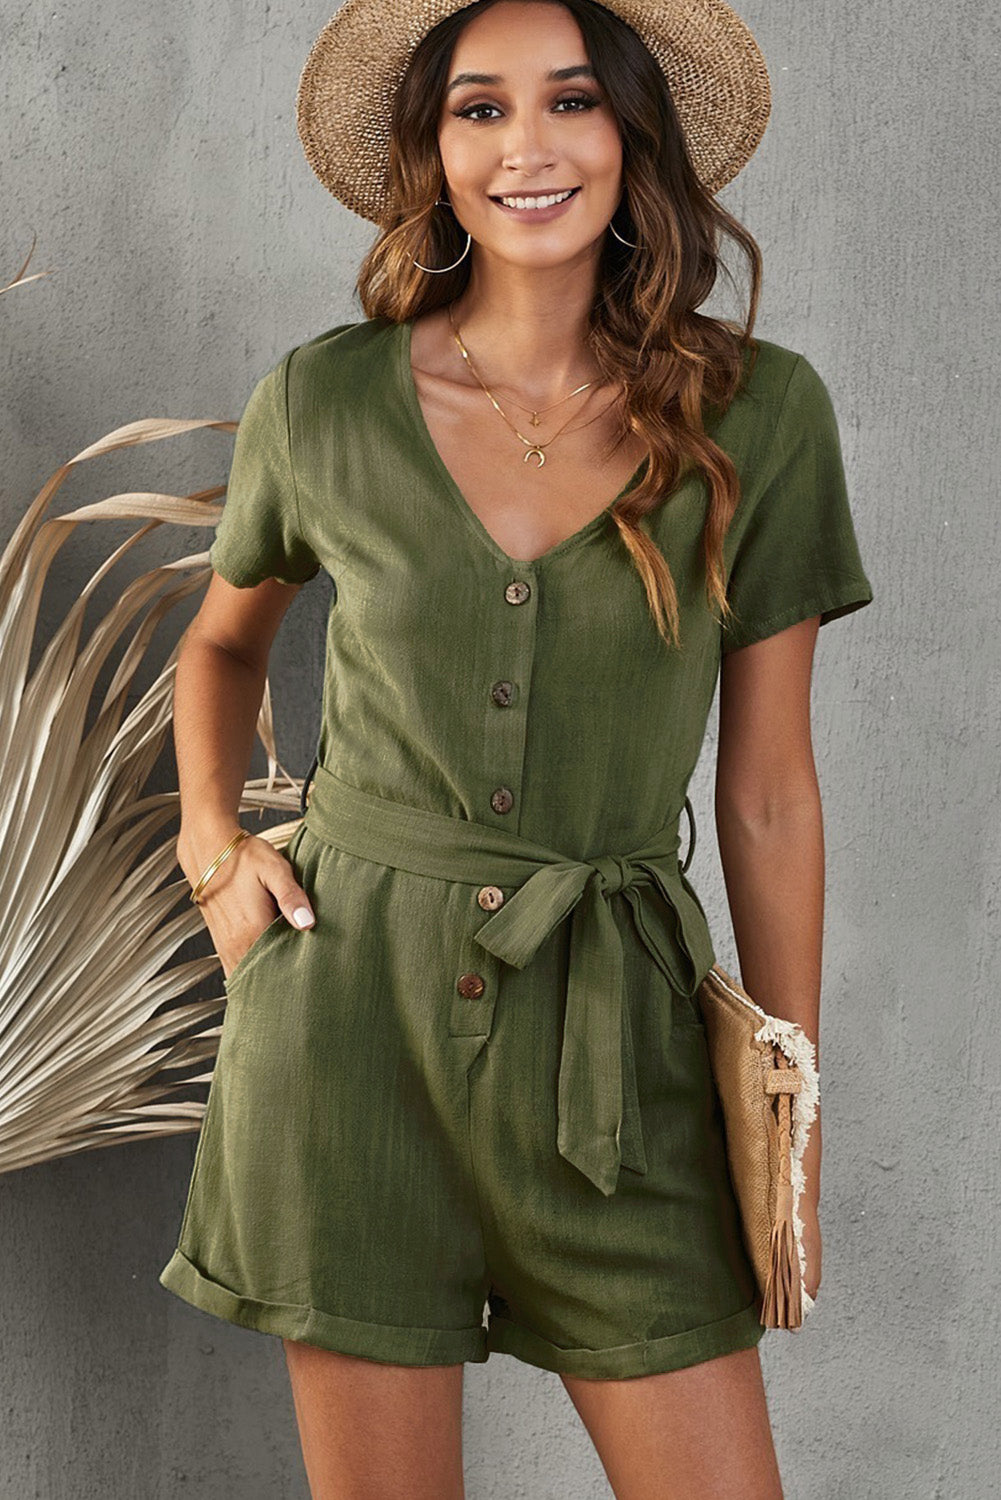 V-Neck Short Sleeve Tie Belt Romper with Pockets Sunset and Swim Army Green S 